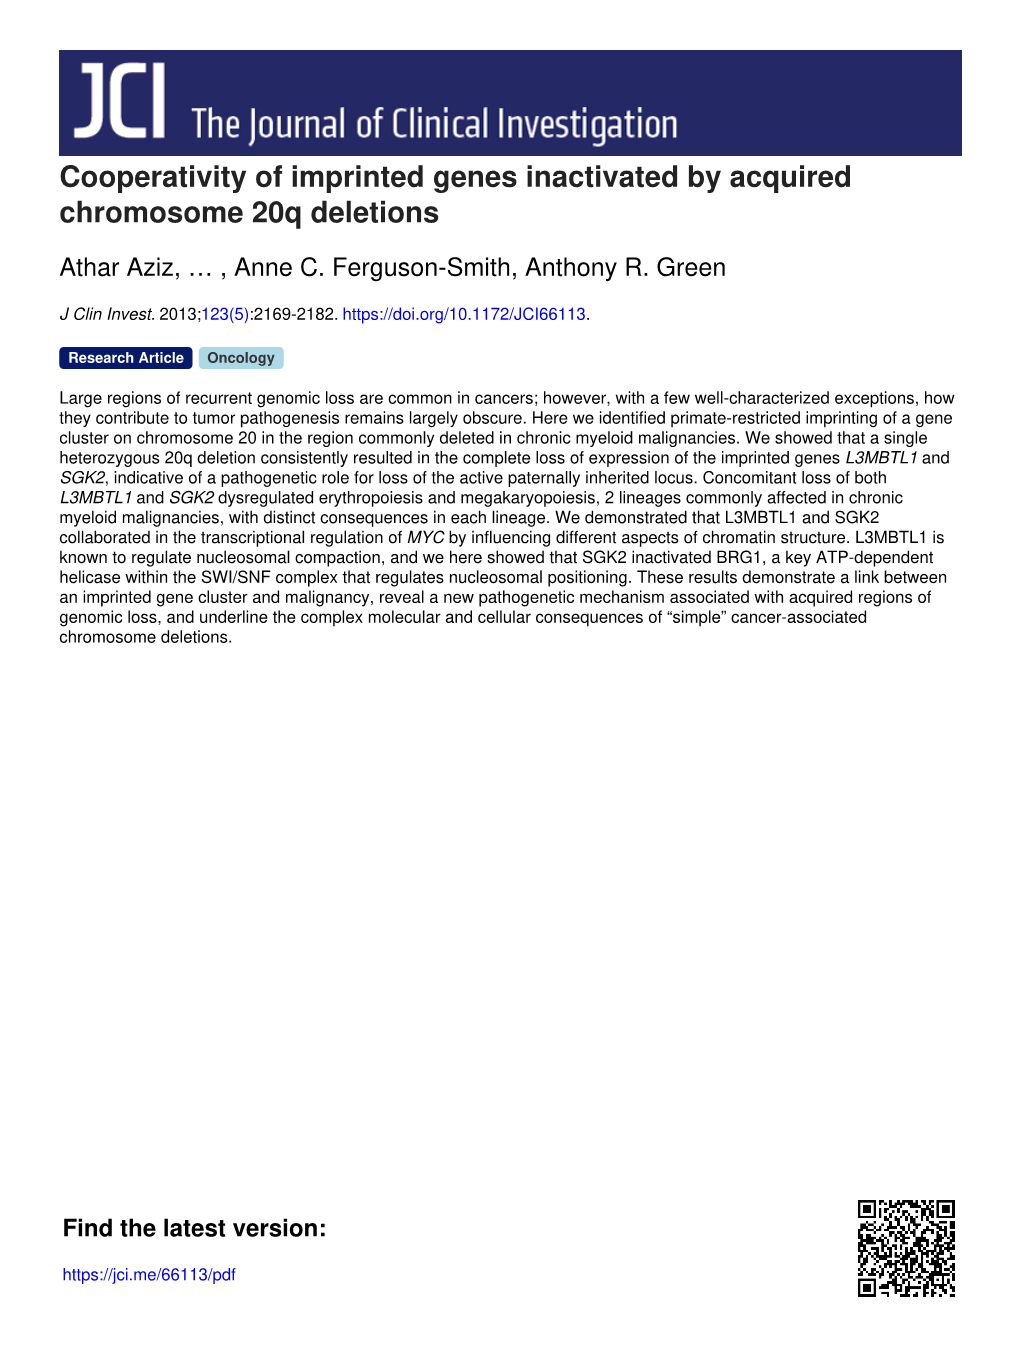 Cooperativity of Imprinted Genes Inactivated by Acquired Chromosome 20Q Deletions